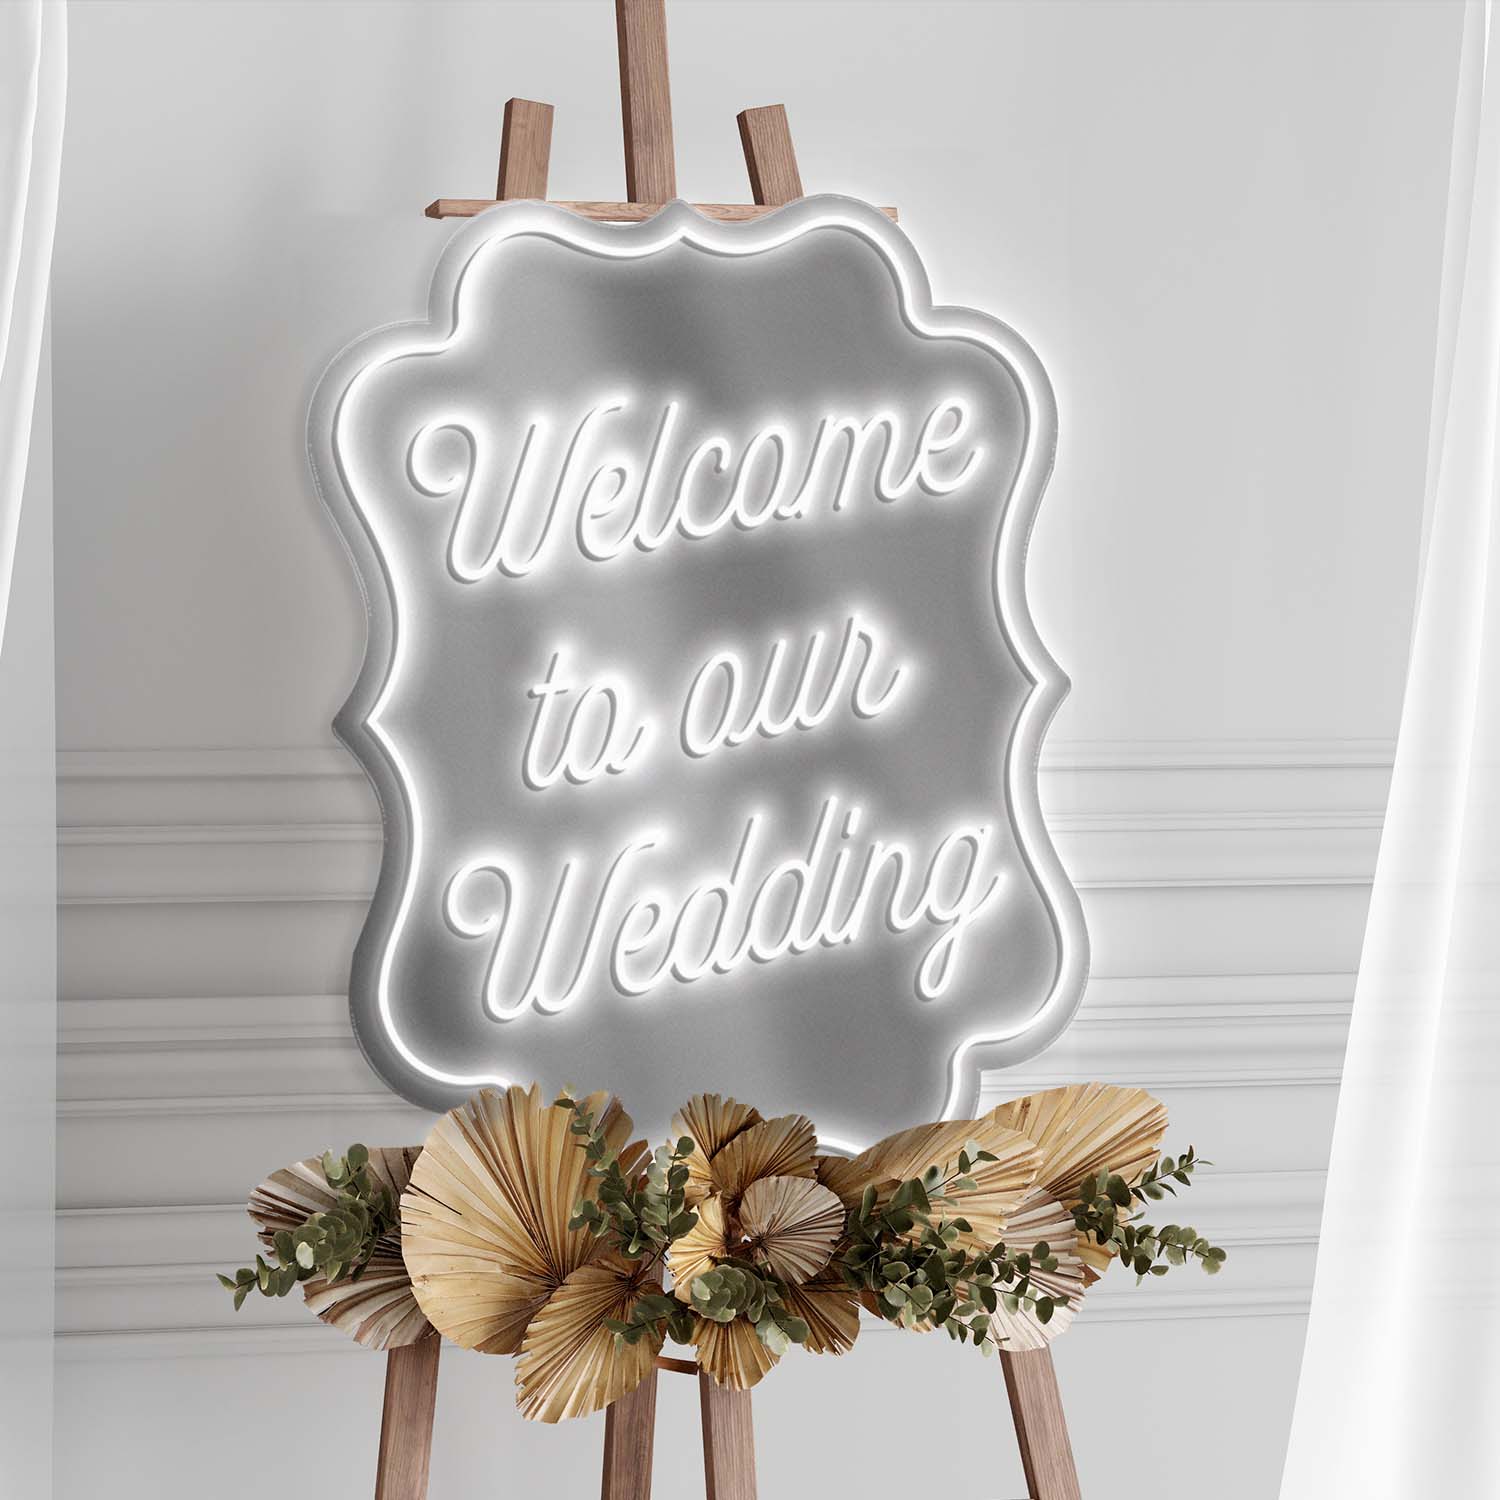 Welcome to our wedding neon sign